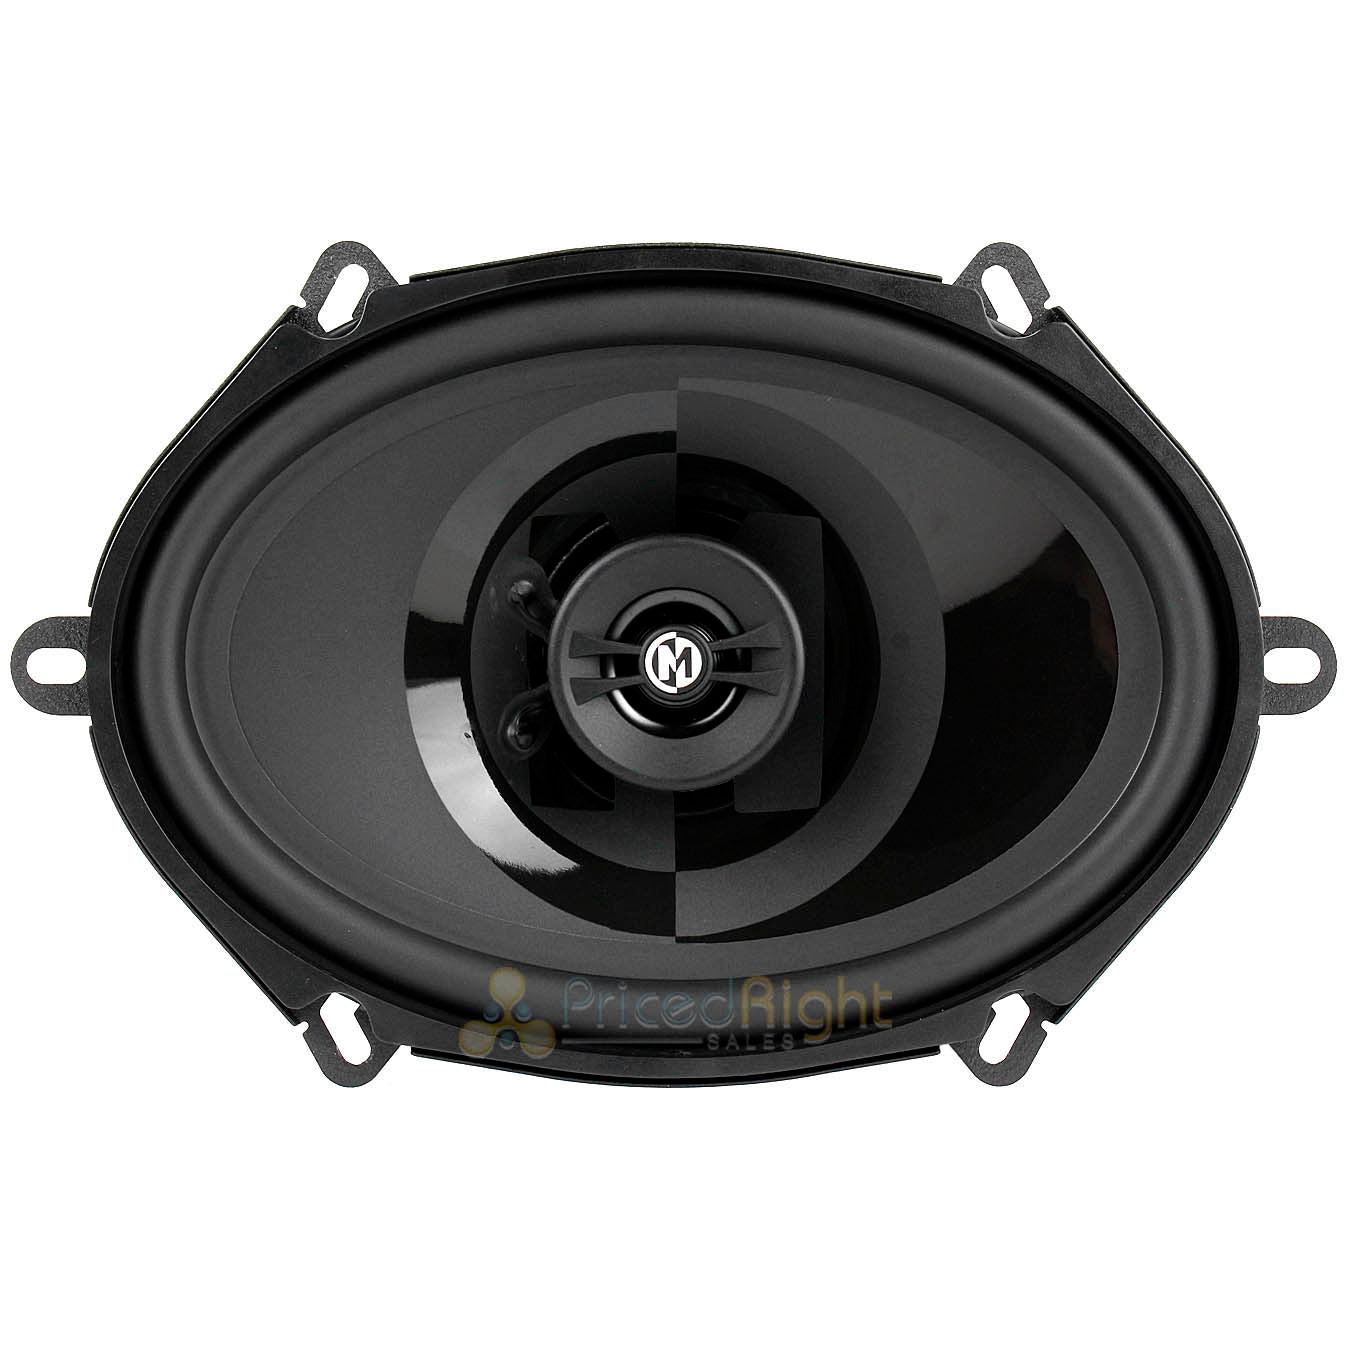 Memphis Audio 5x7" 2 Way Coaxial Speakers 80W Max Power Reference Series PRX57